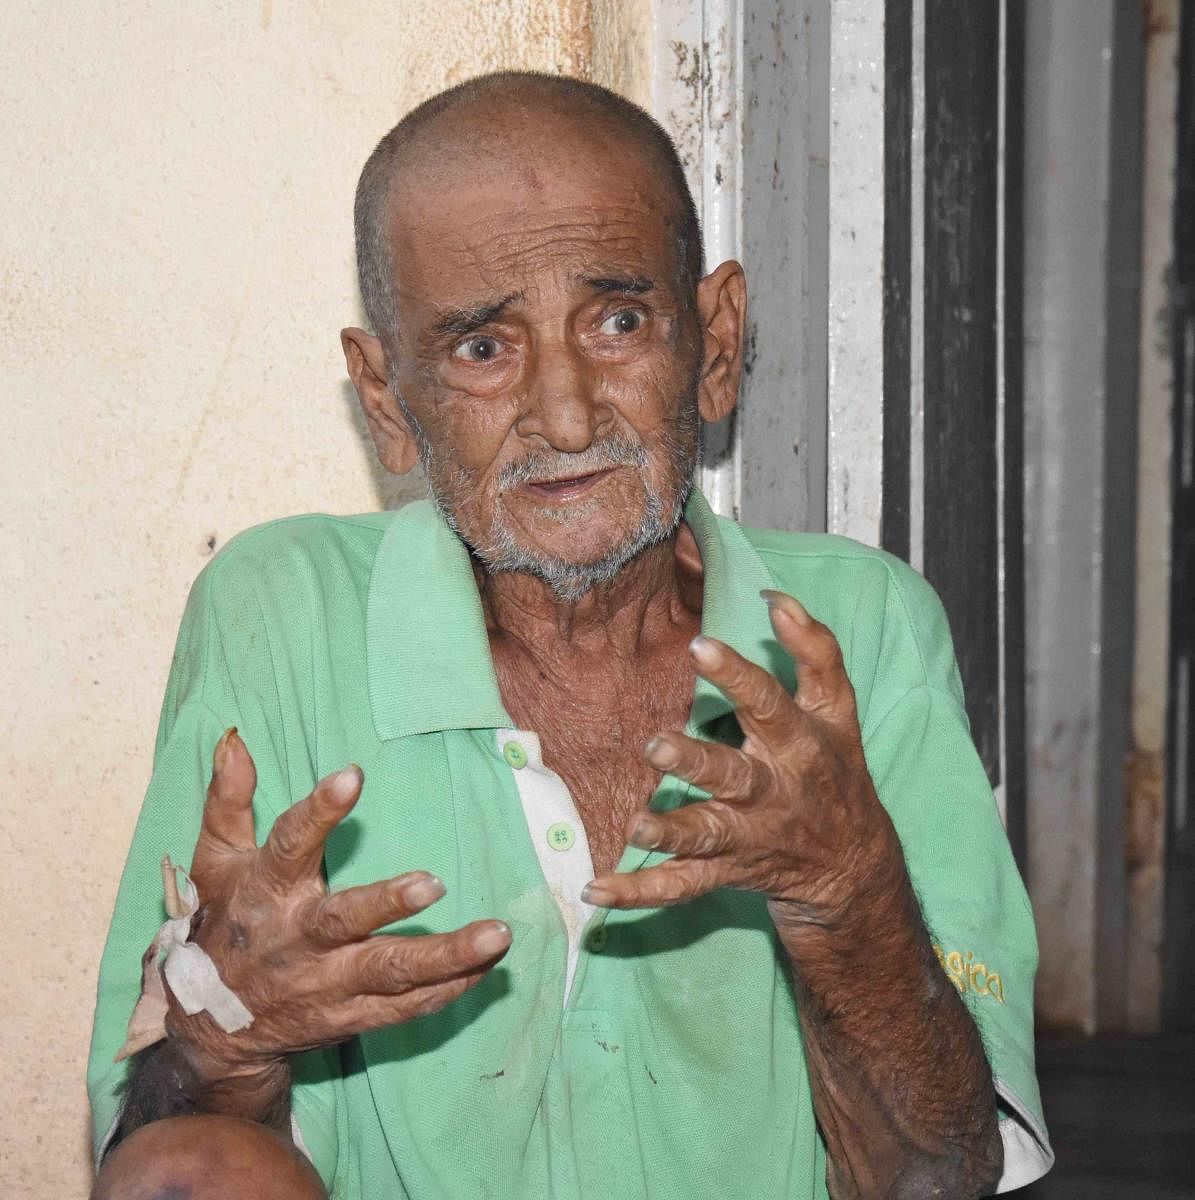 Vincent Christine, who was abandoned by his son, has been housed at the orphanage on the civil hospital premises in Dharwad. DH photo